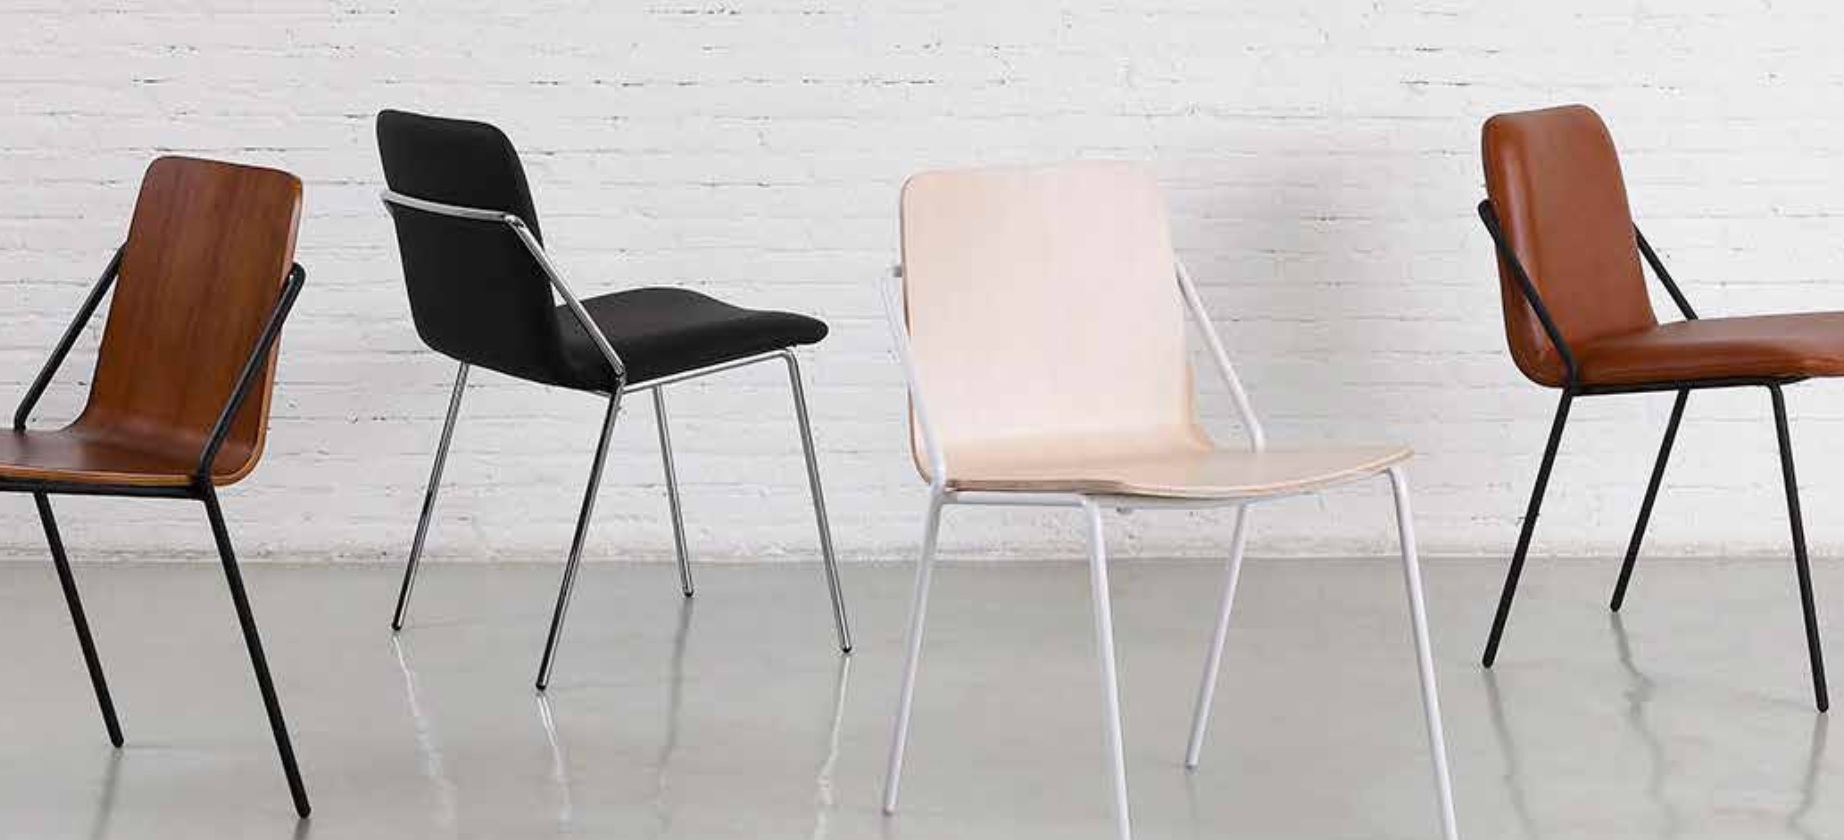 At ICFF 2018: Nuans Sling Chair and Trace Lounge